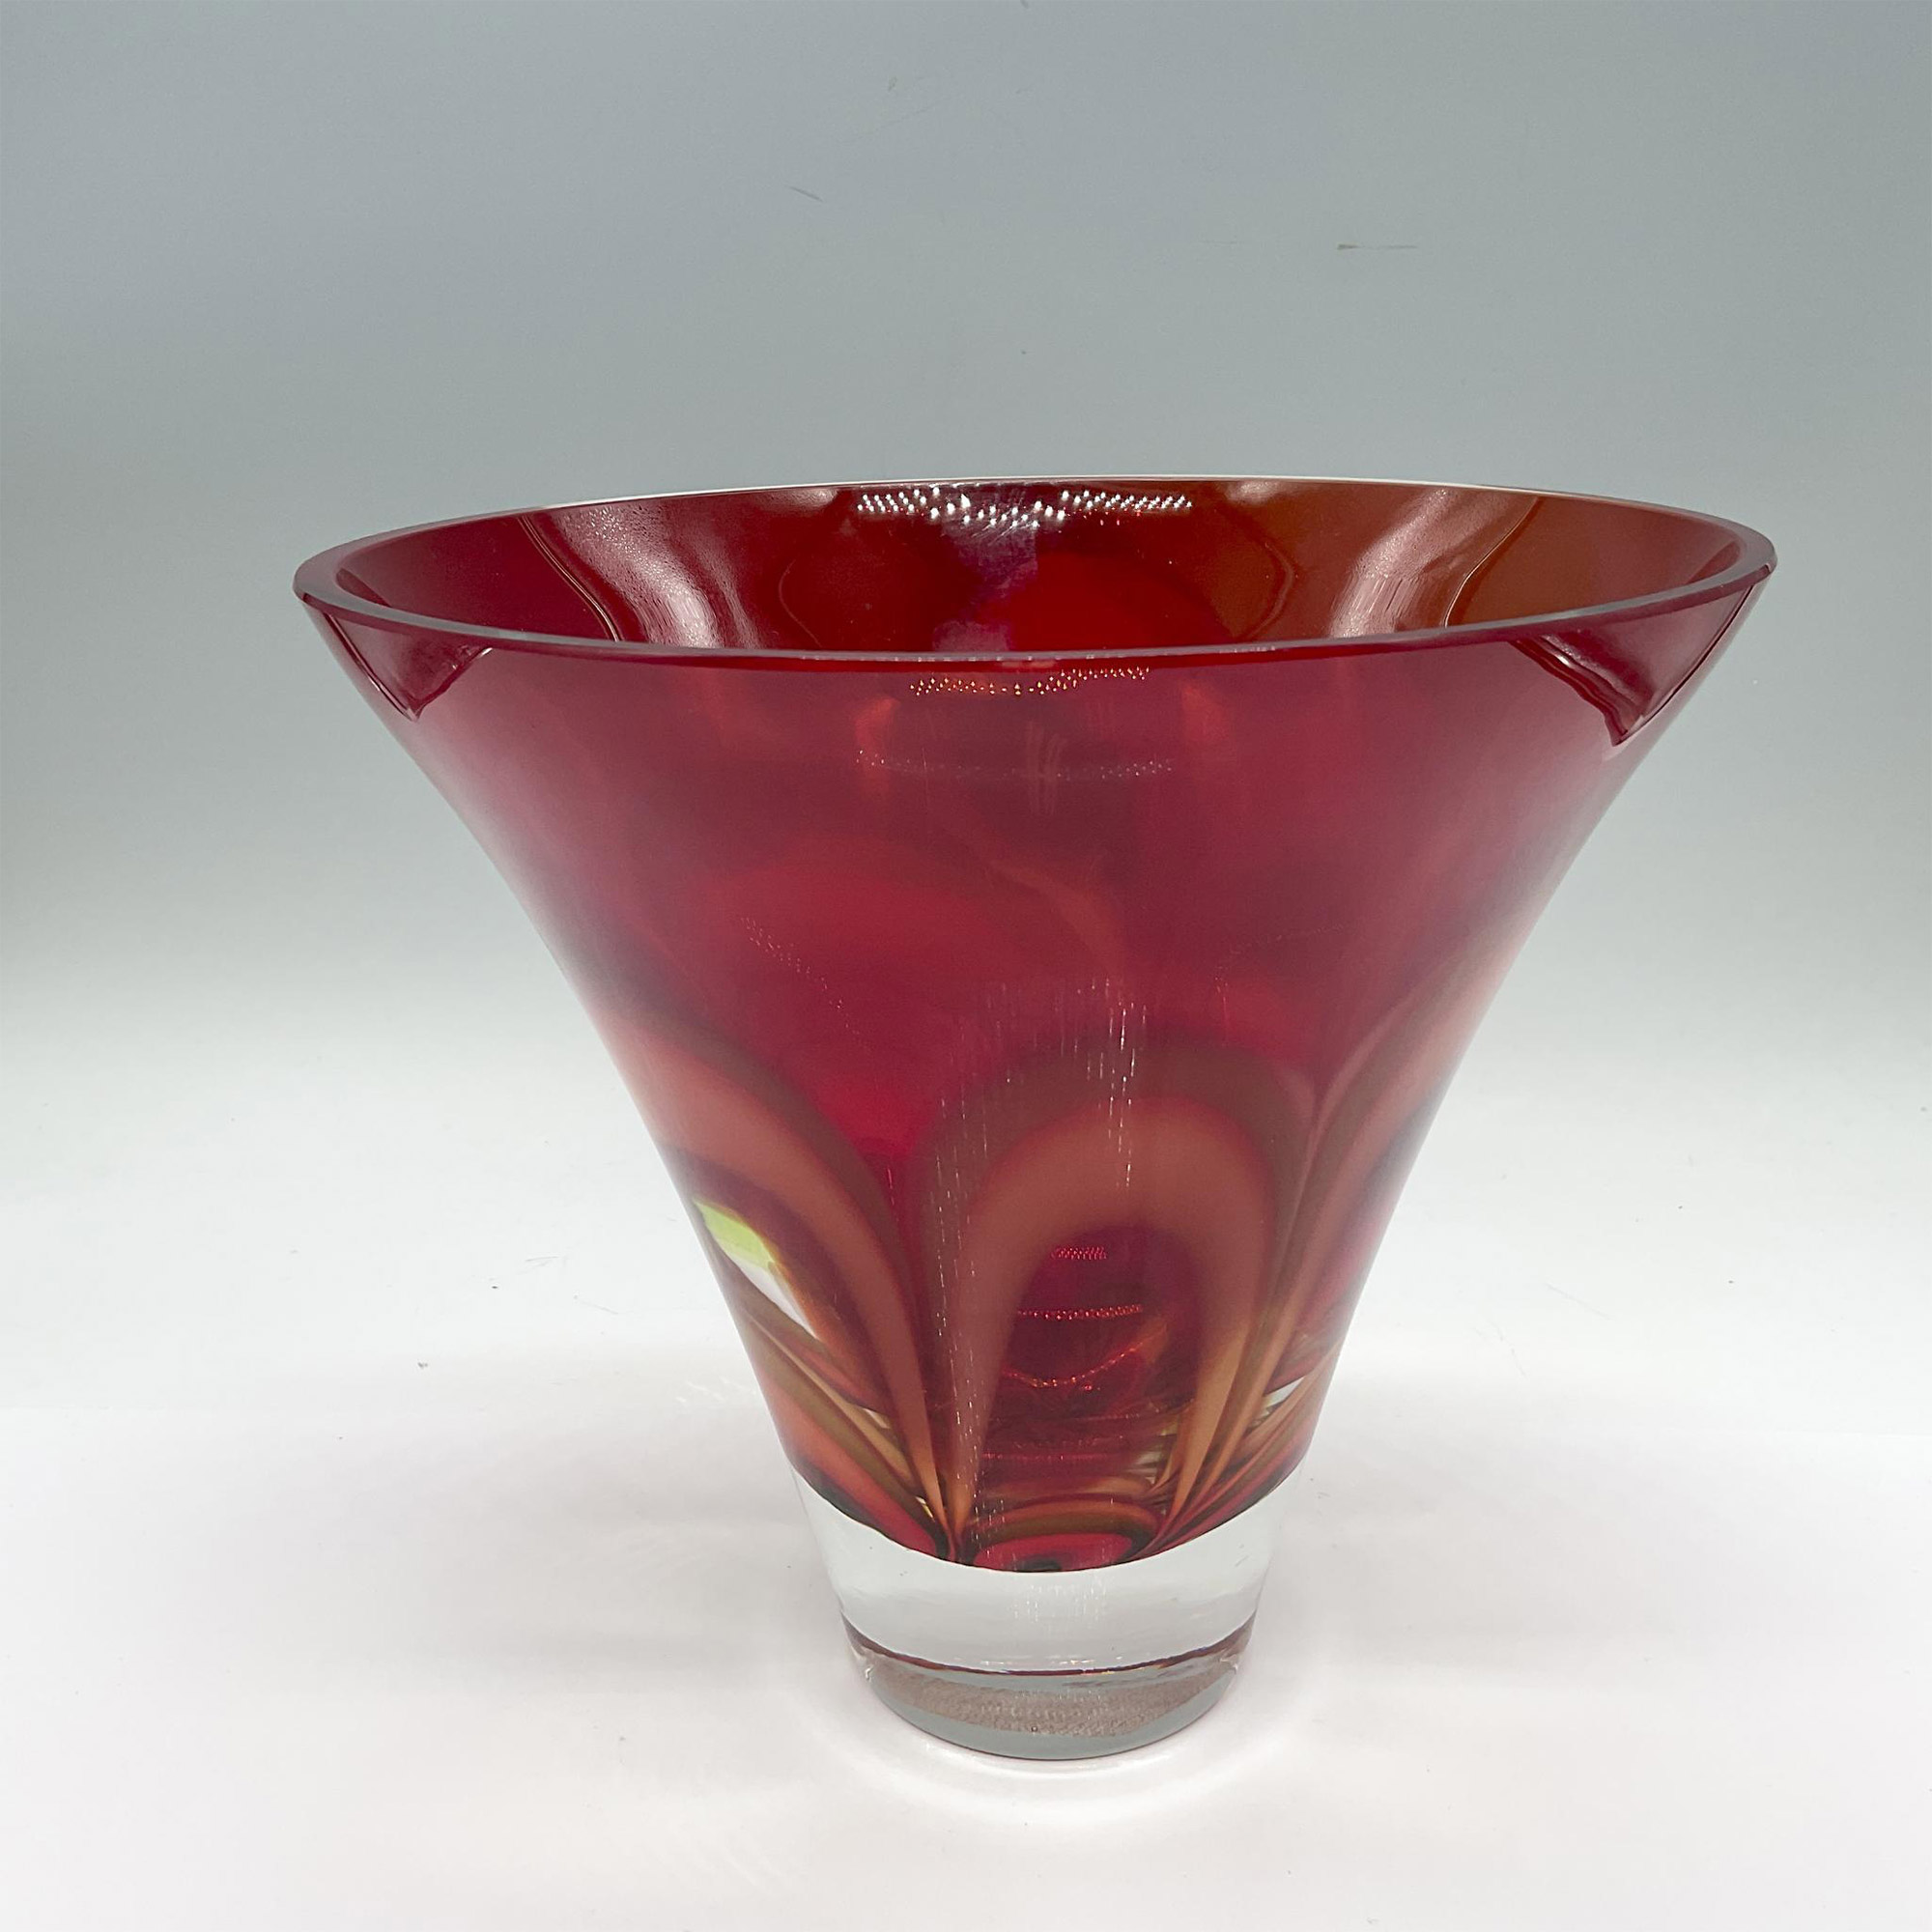 Waterford Red and Amber Glass Vase, Evolution - Image 2 of 4